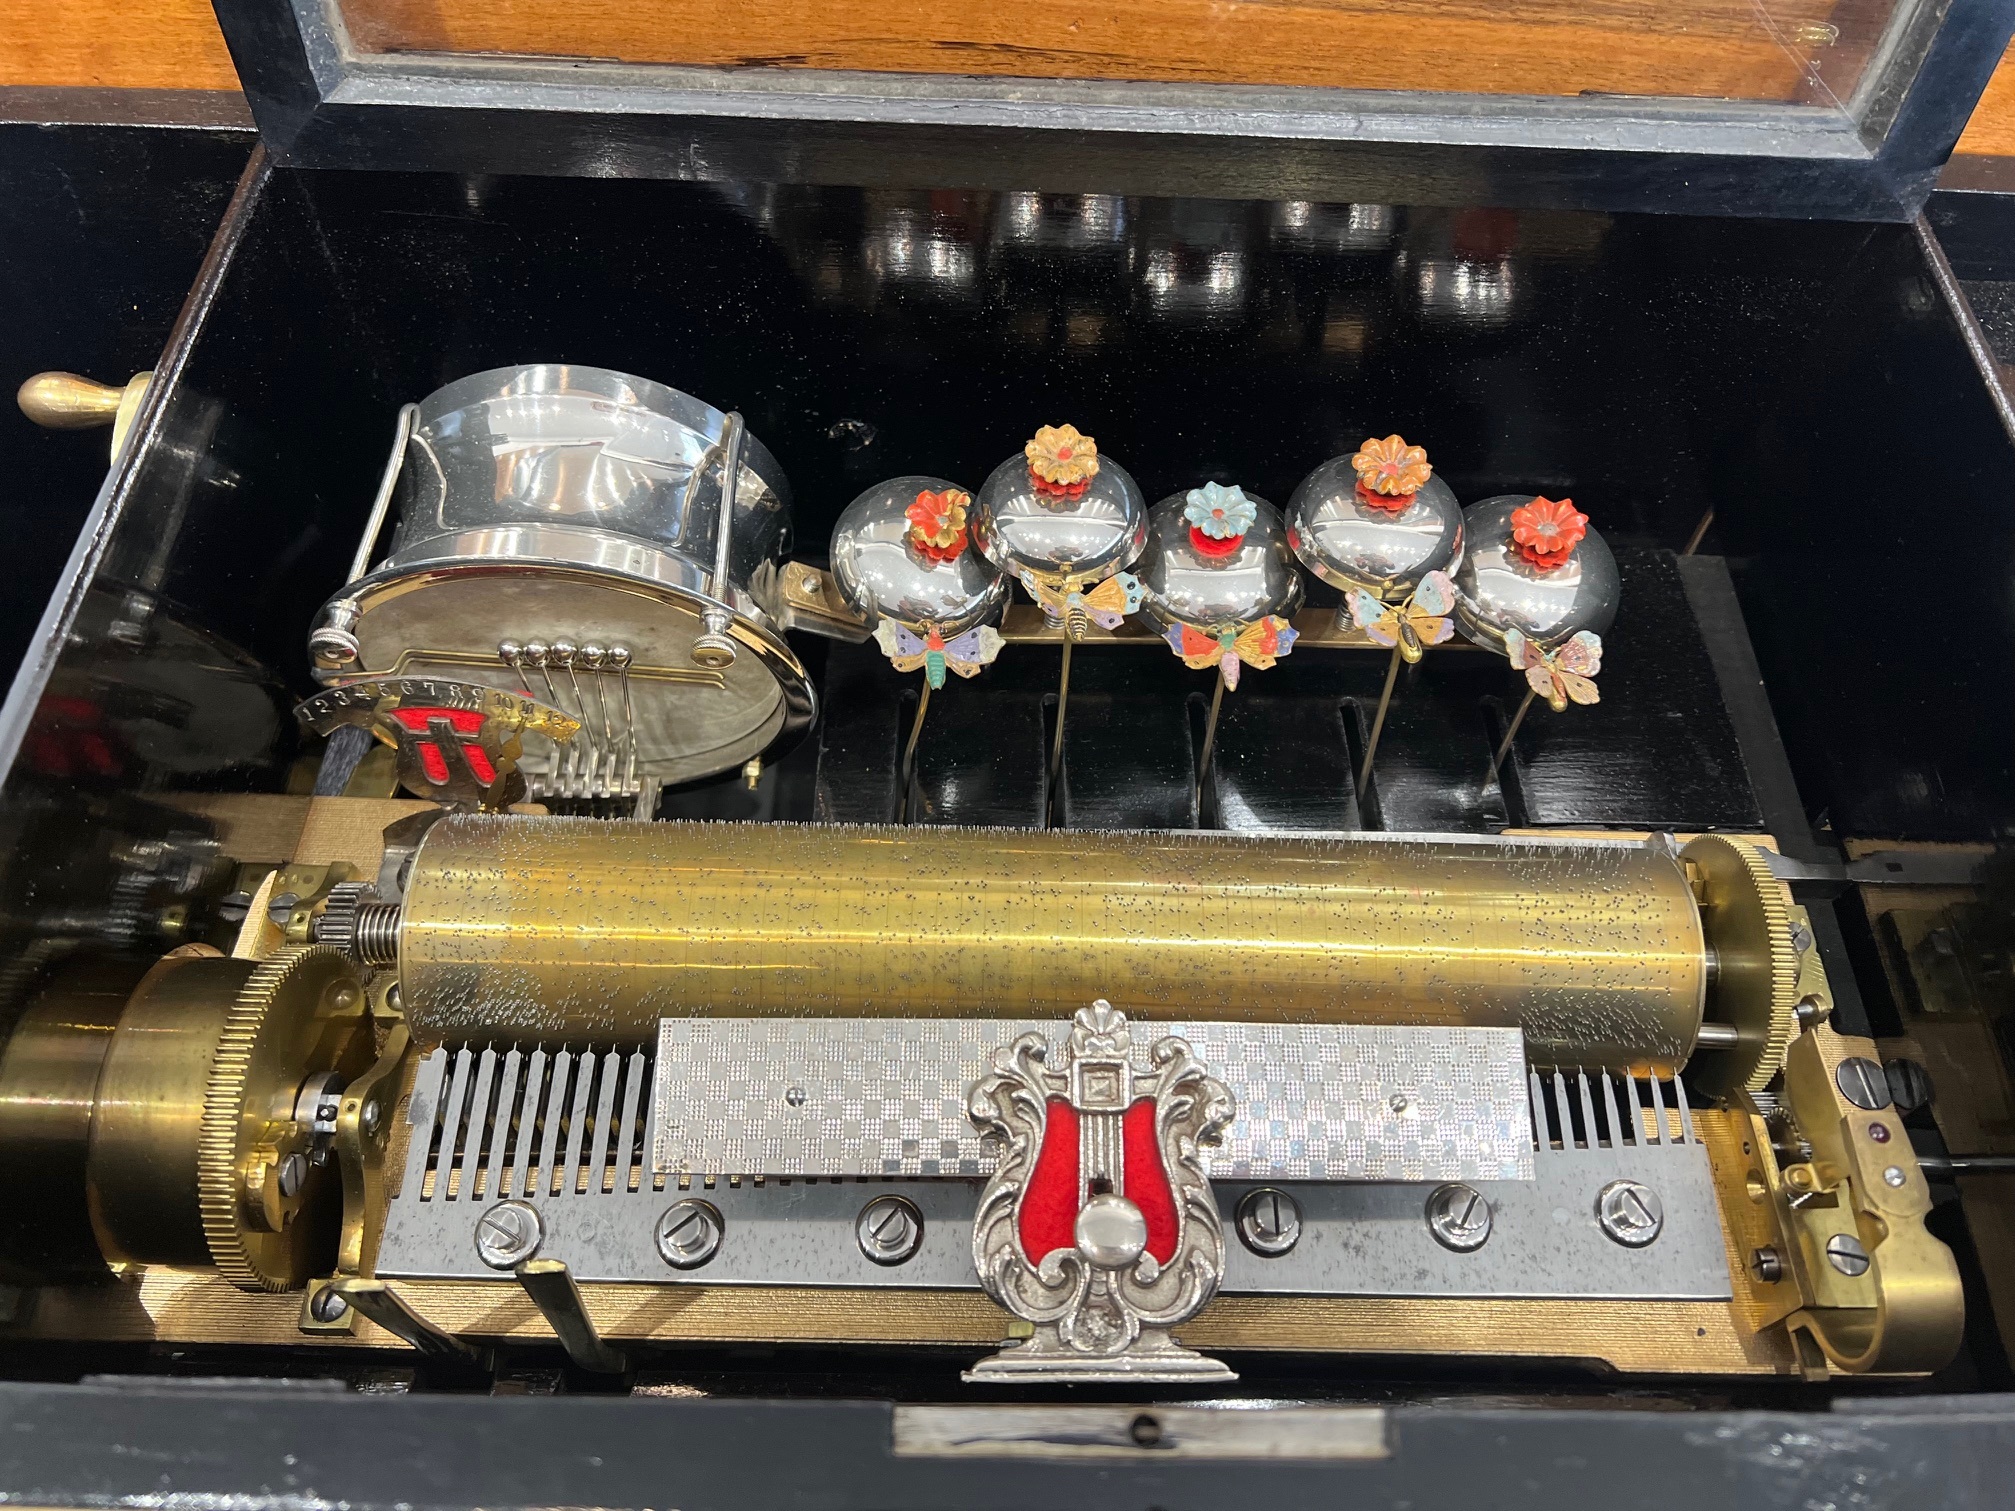 A RARE 19TH CENTURY SWISS MUSIC BOX WITH BELLS AND DRUM - Image 10 of 10